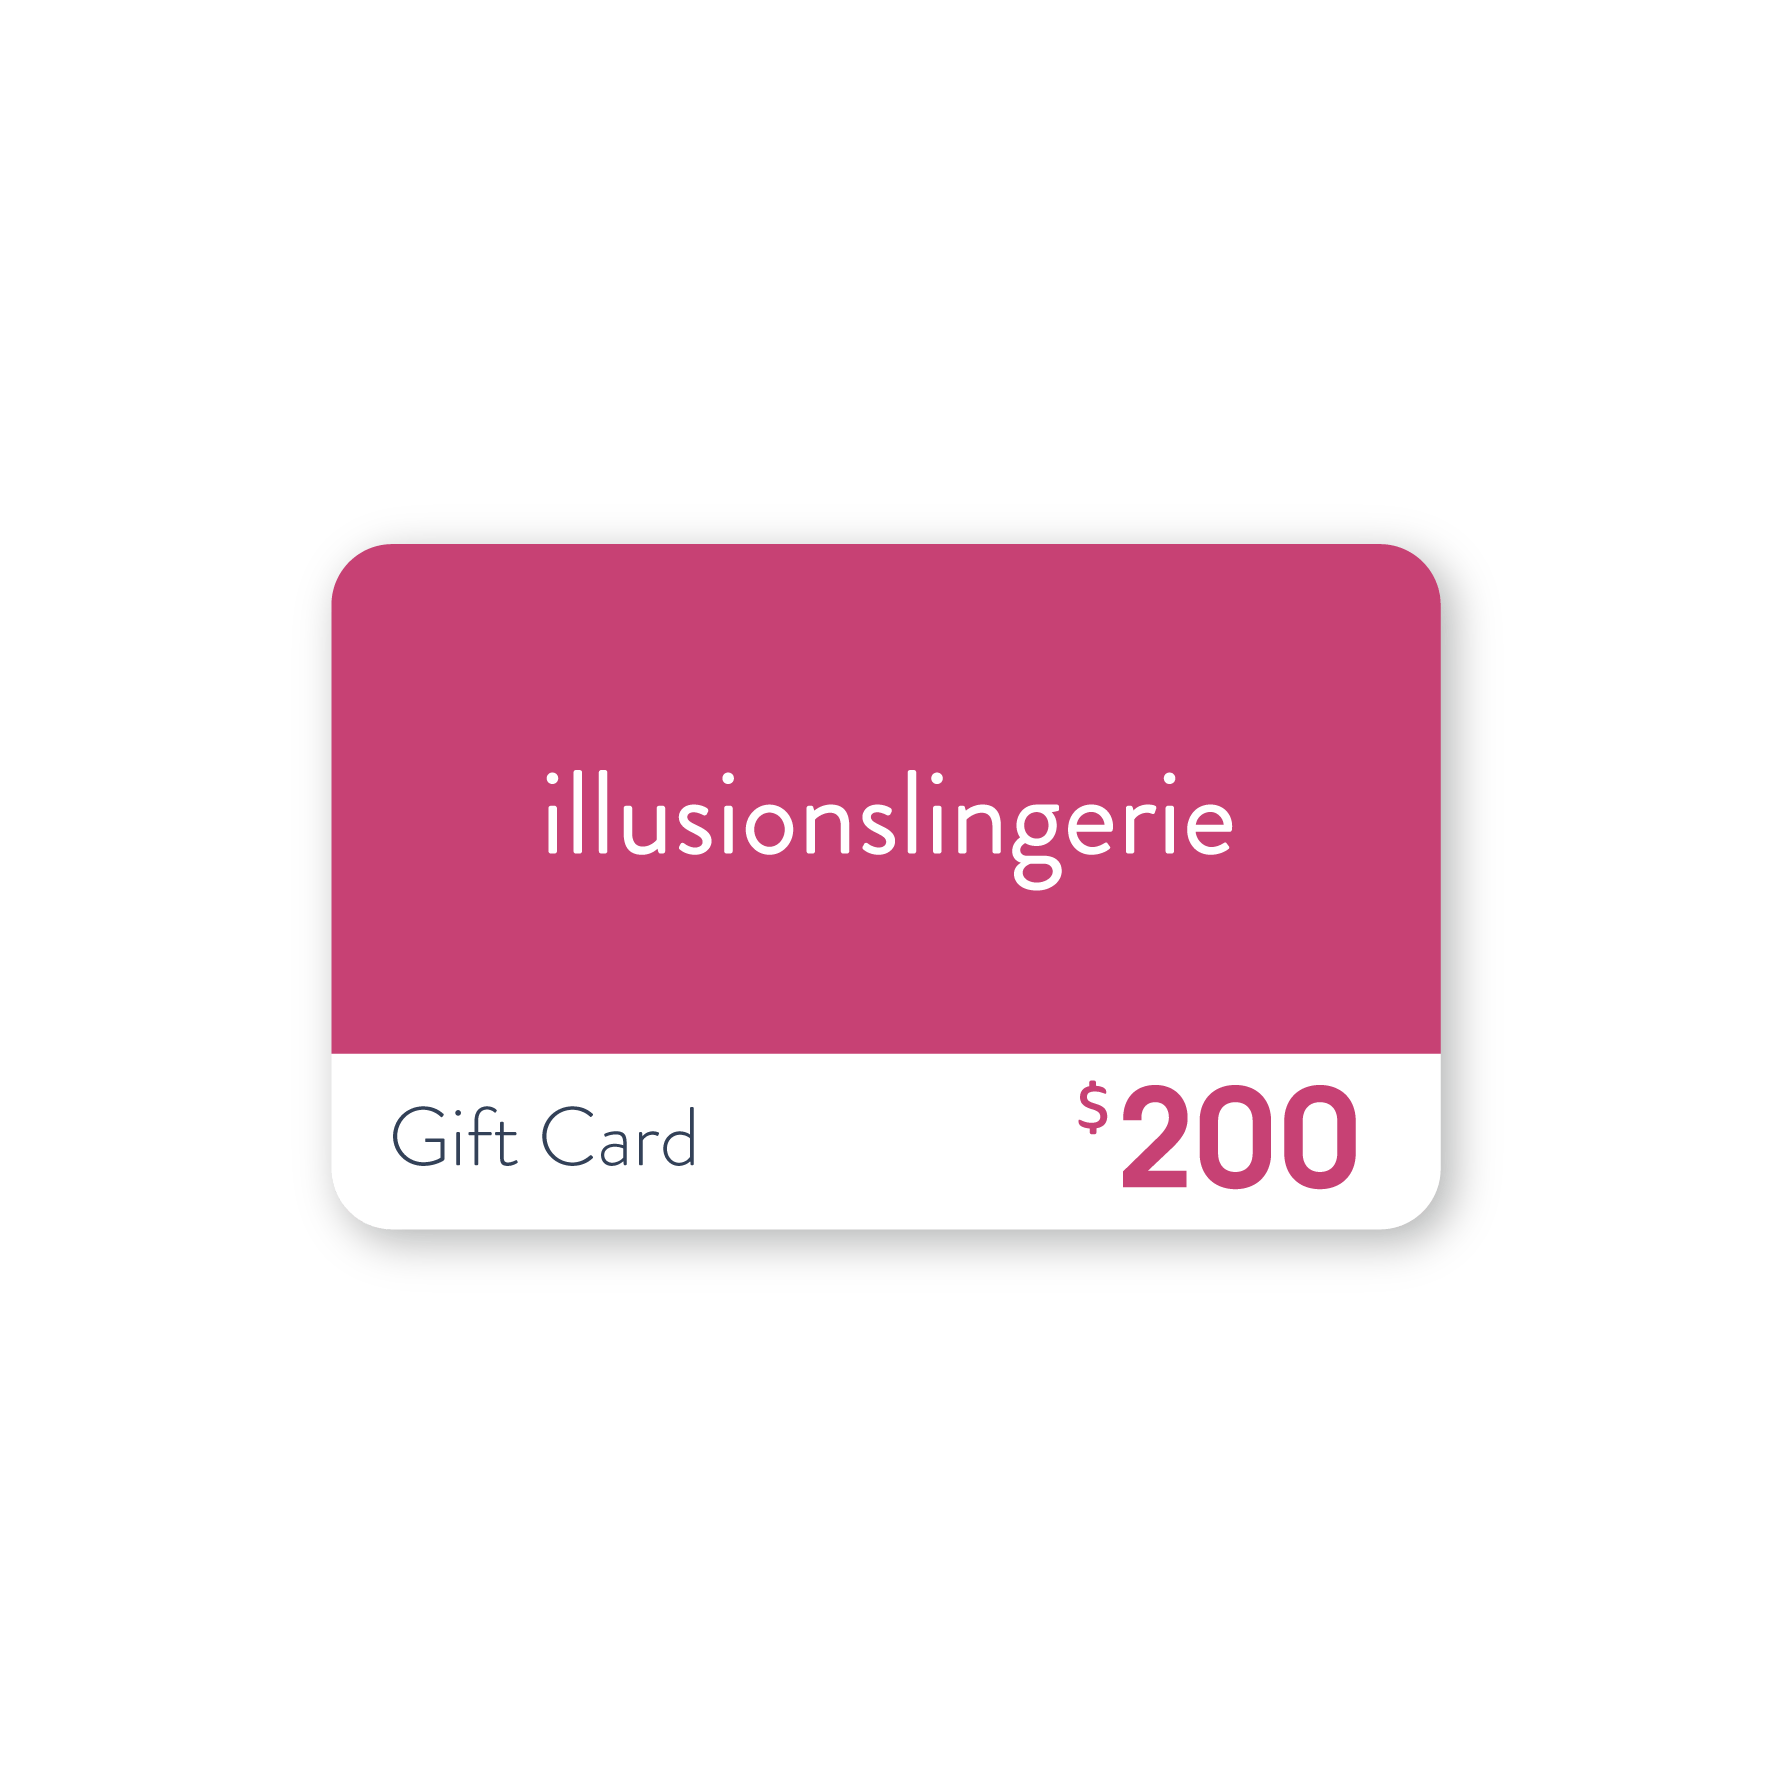 Illusions Lingerie Gift Card $200 Digital Gift Card - Illusions Lingerie from Illusions Lingerie in Melbourne